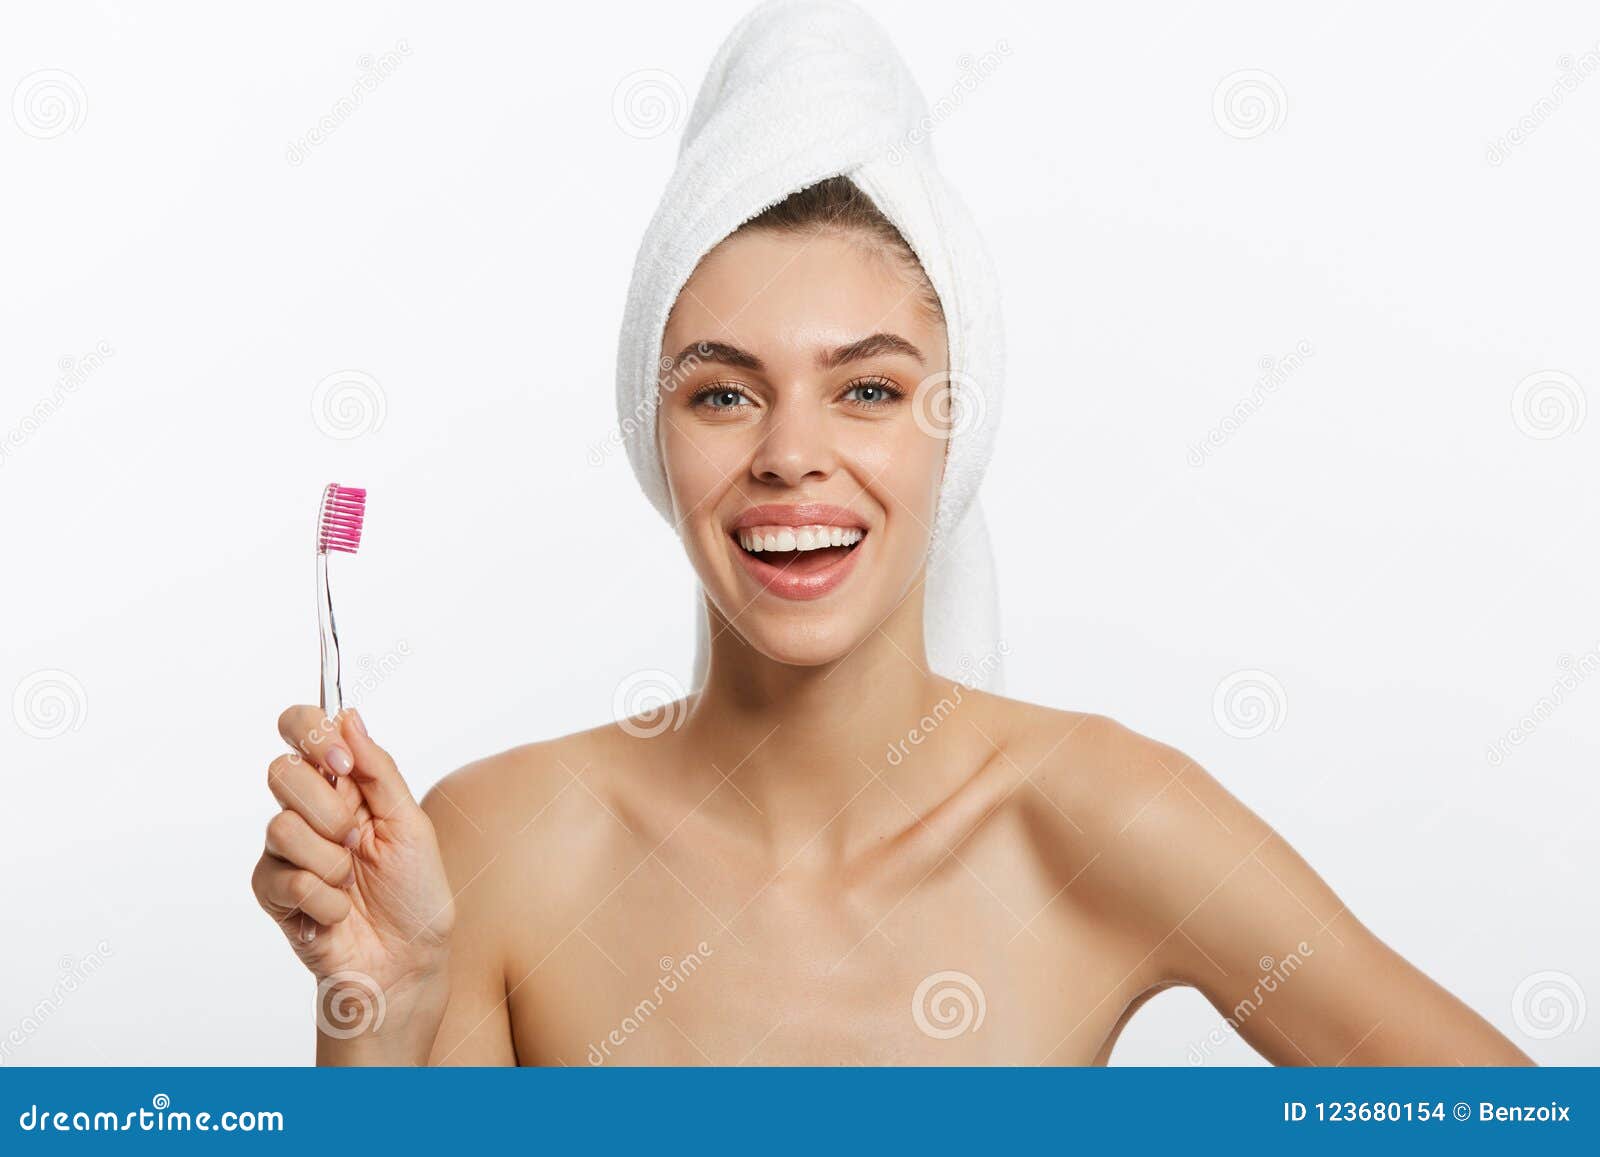 smiling woman brushing her teeth with towel on her head. a great smile